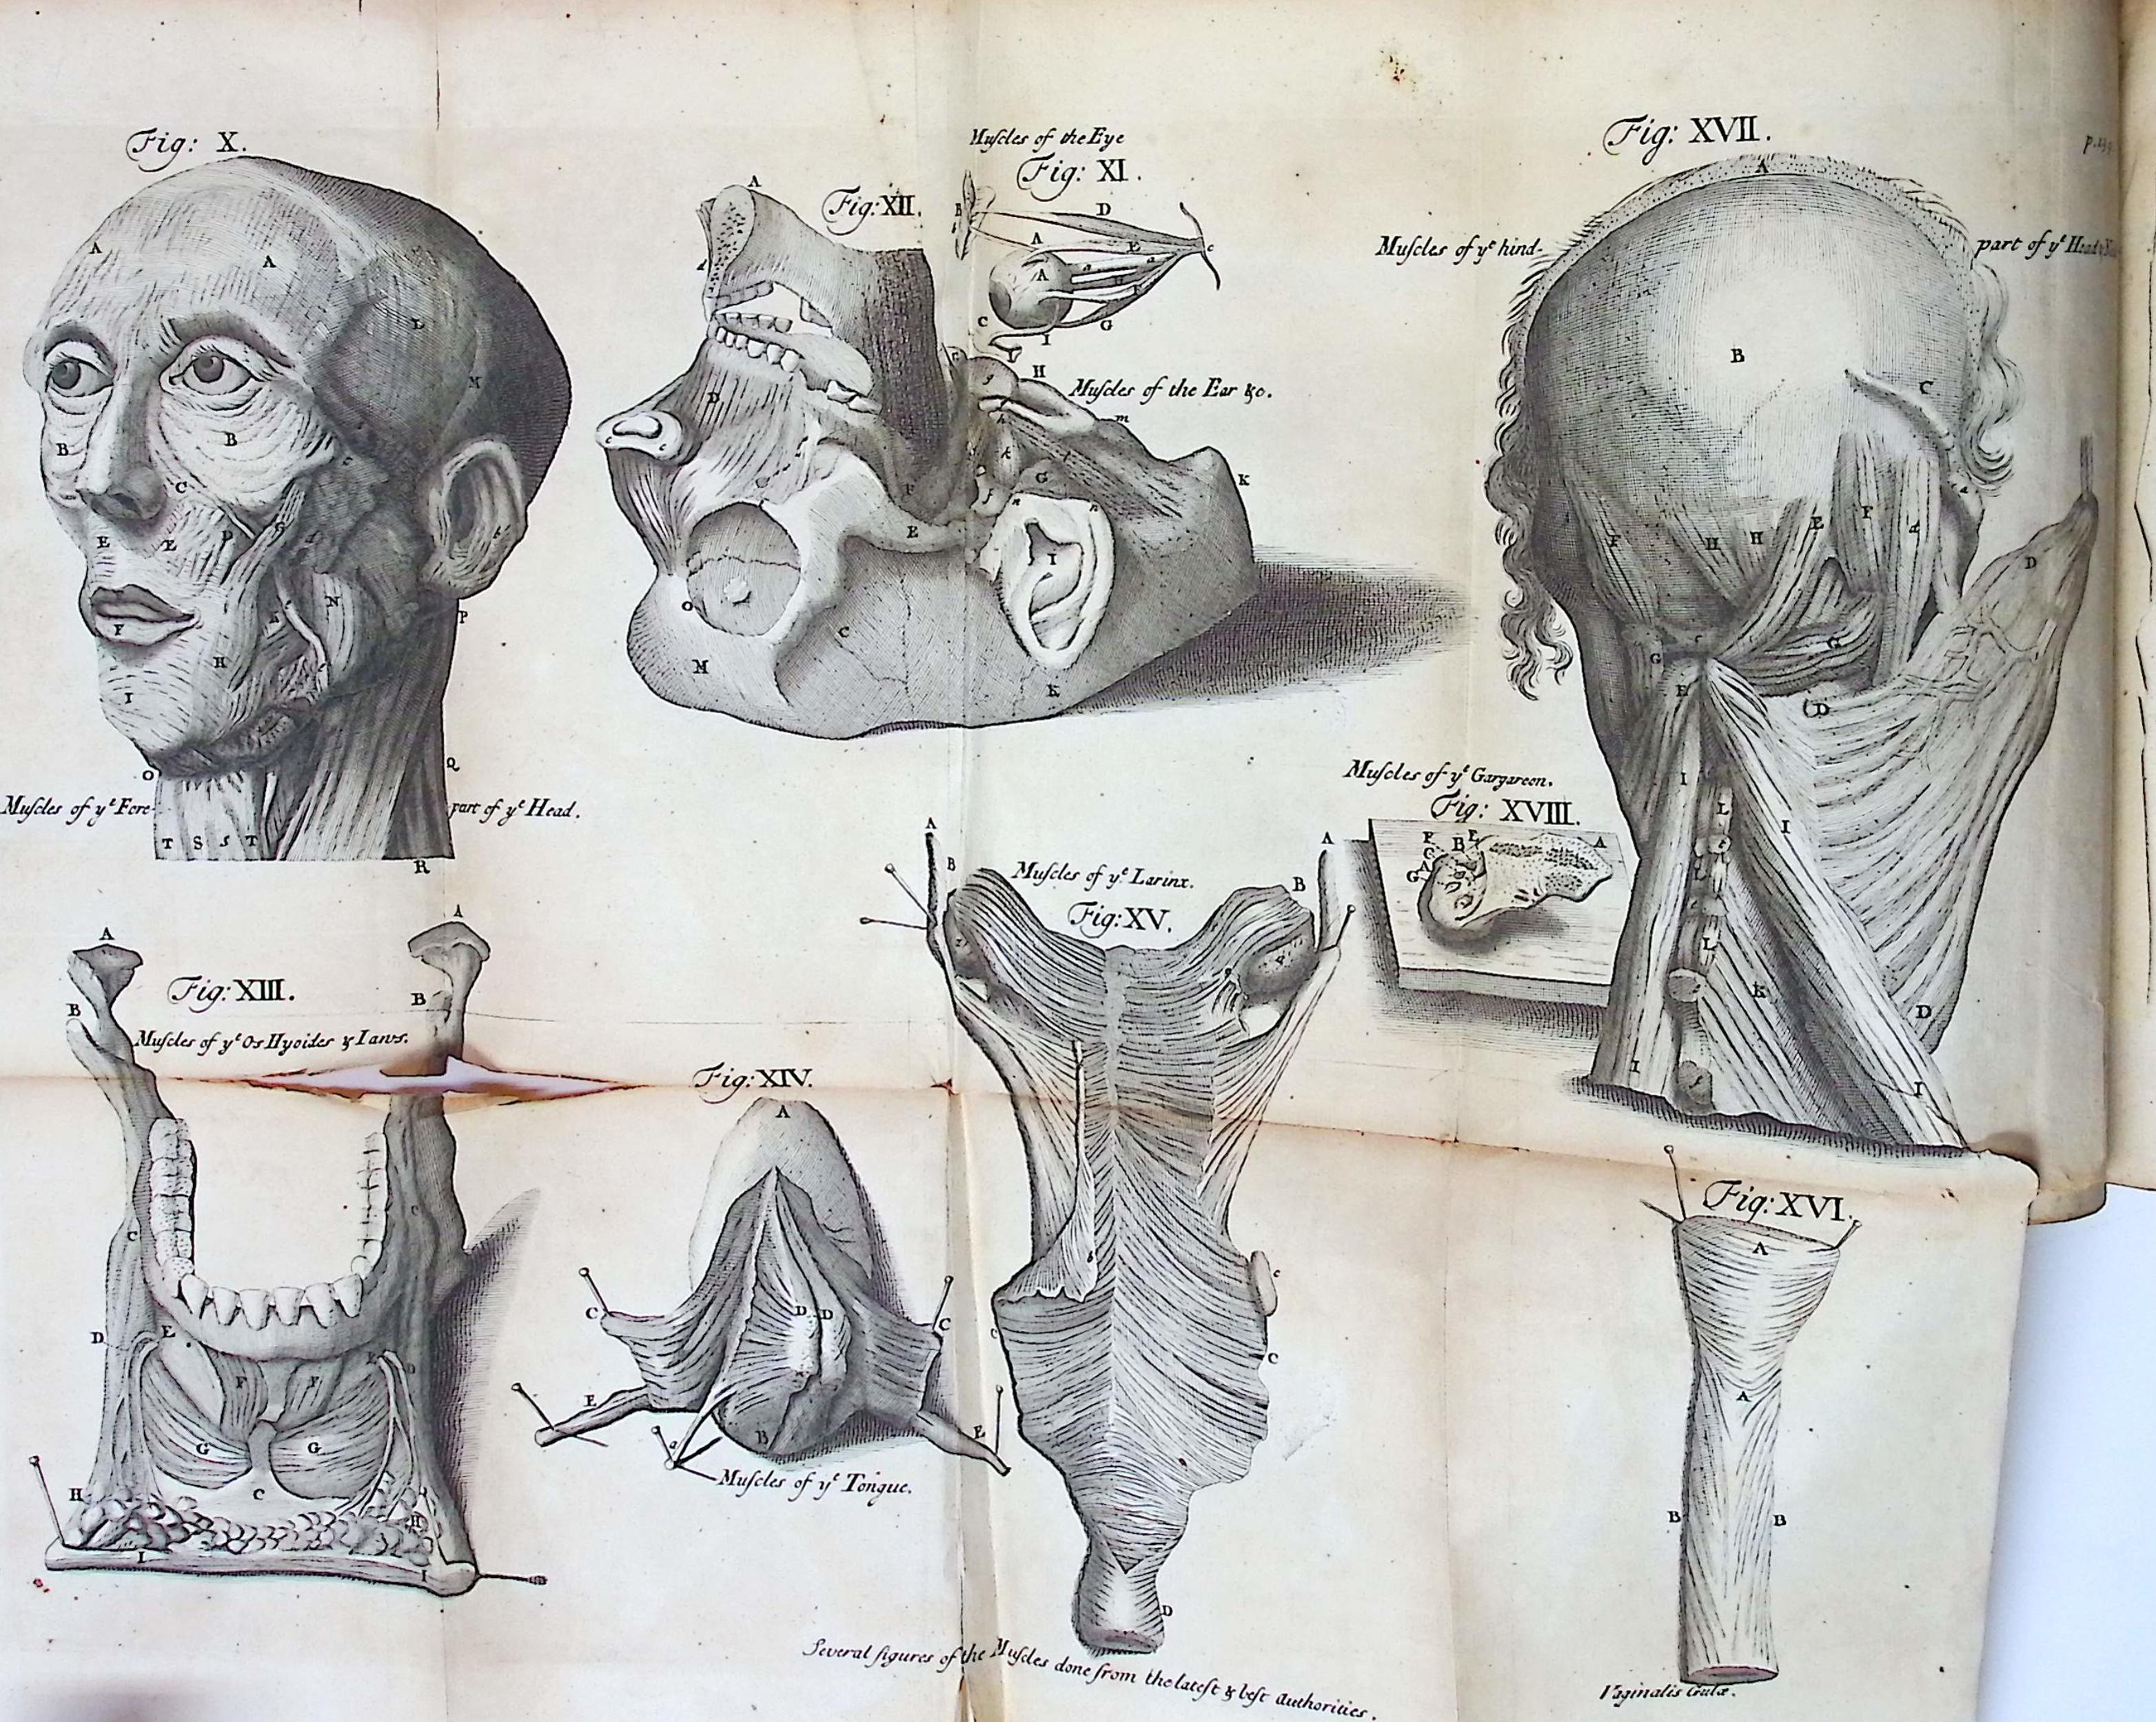 Bibliotheca Anatomica, Medica, Chirurgica, &c. Containing a Description of the Several Parts of the Body Each Done by Some One of More Eminent Physician or Chirurgeon; with their Disease and Cures. Volume 2 [of 3].